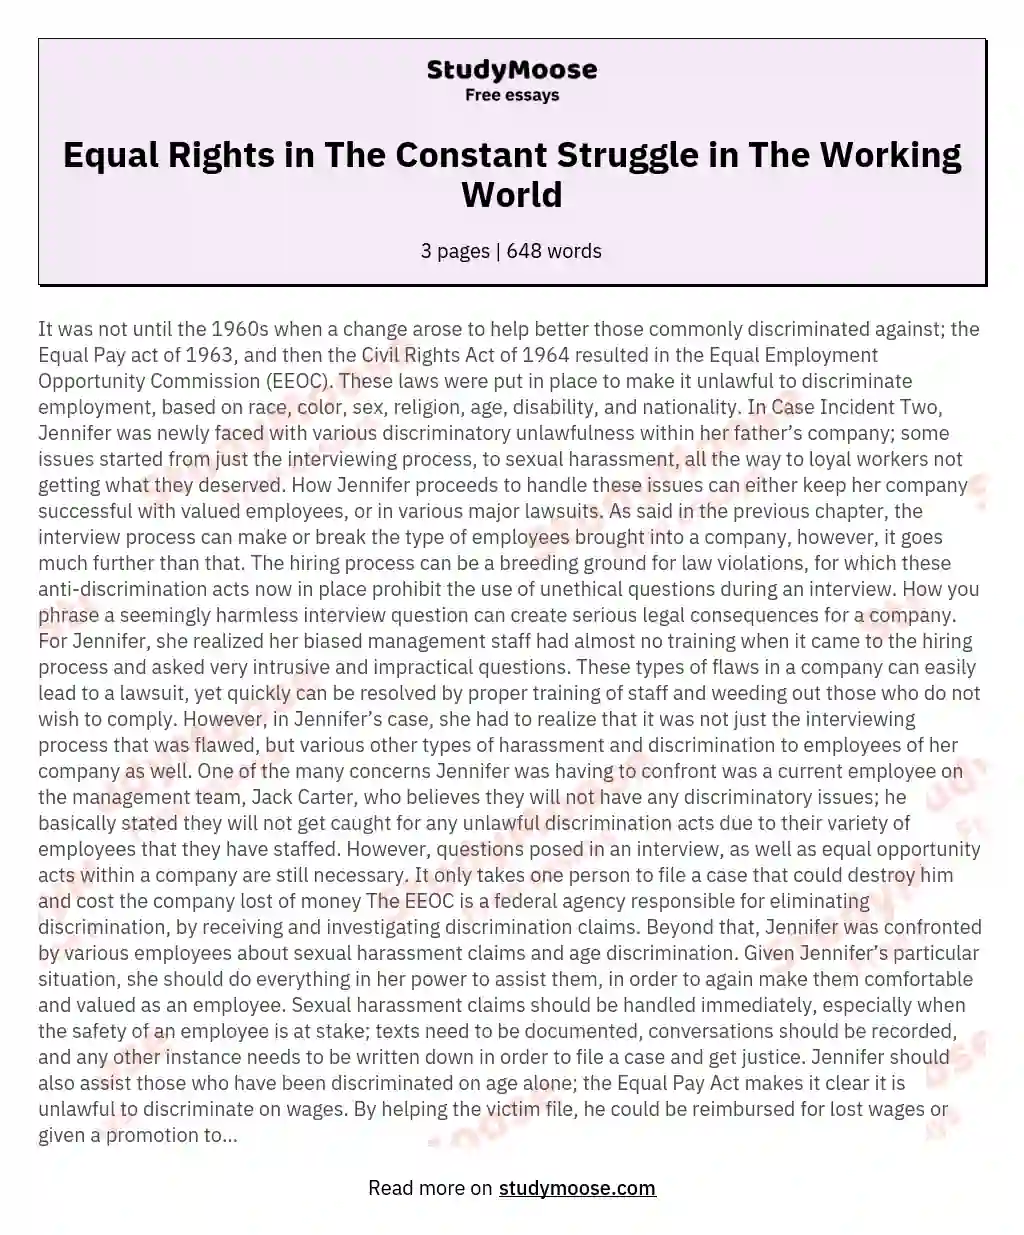 Equal Rights in The Constant Struggle in The Working World essay